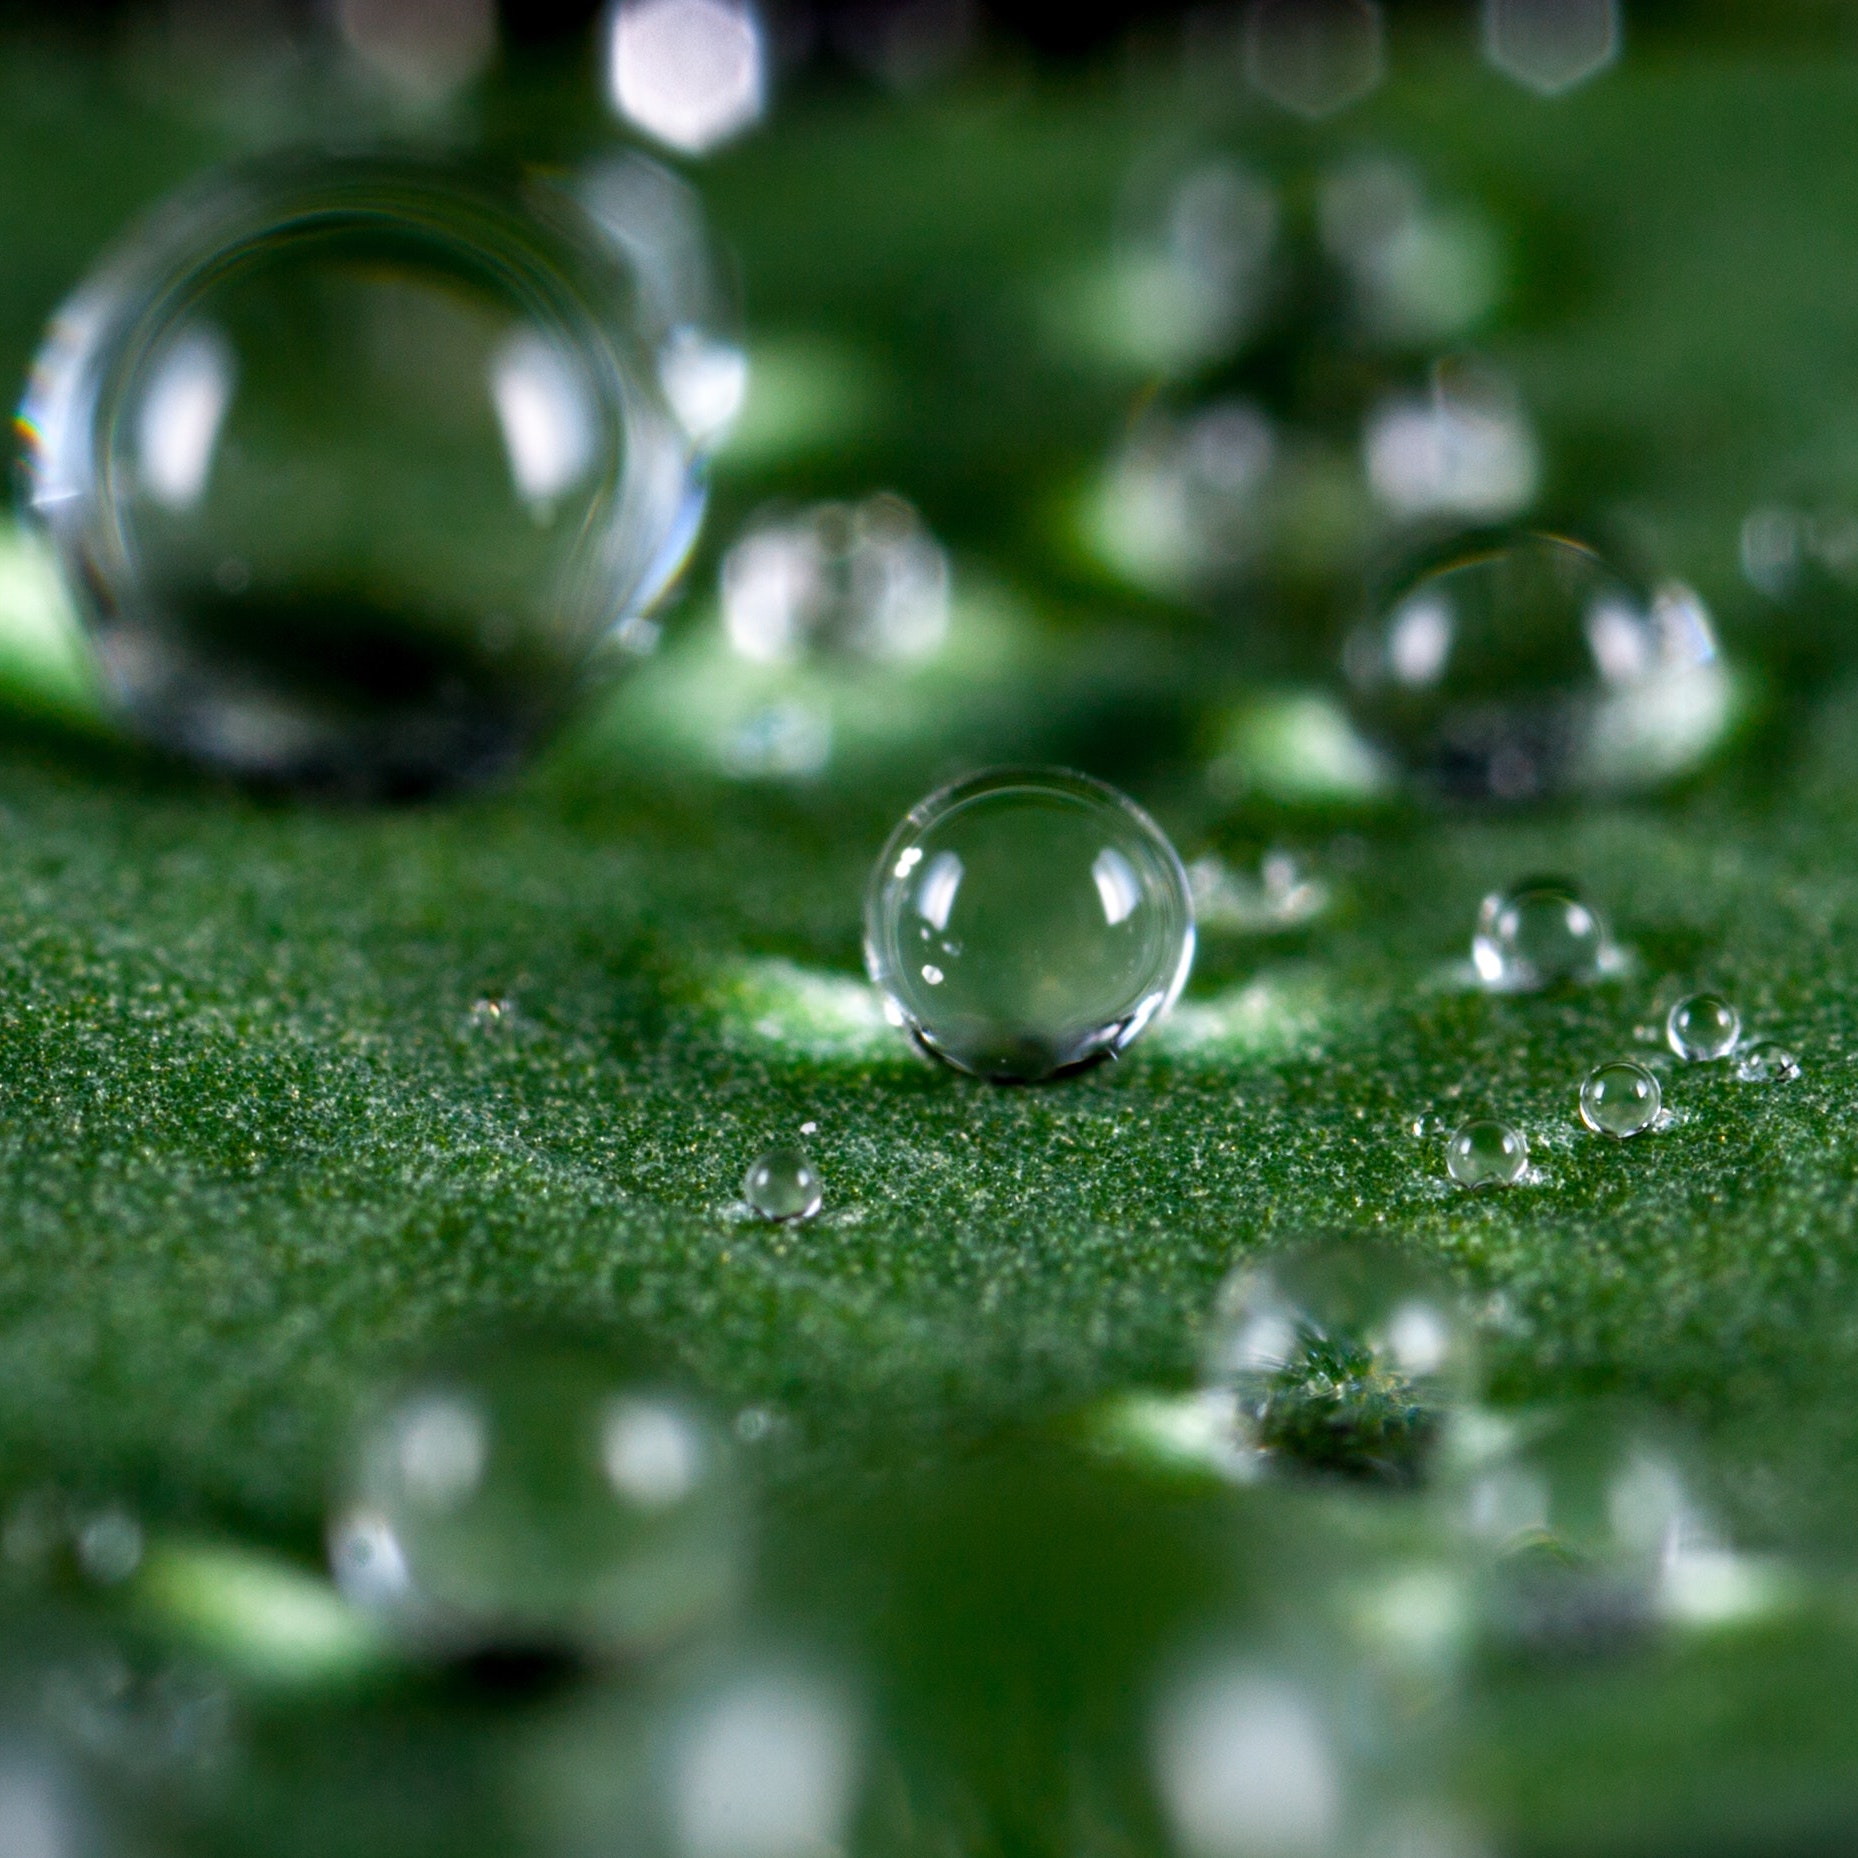 PTFE for water-repellent and breathable textiles